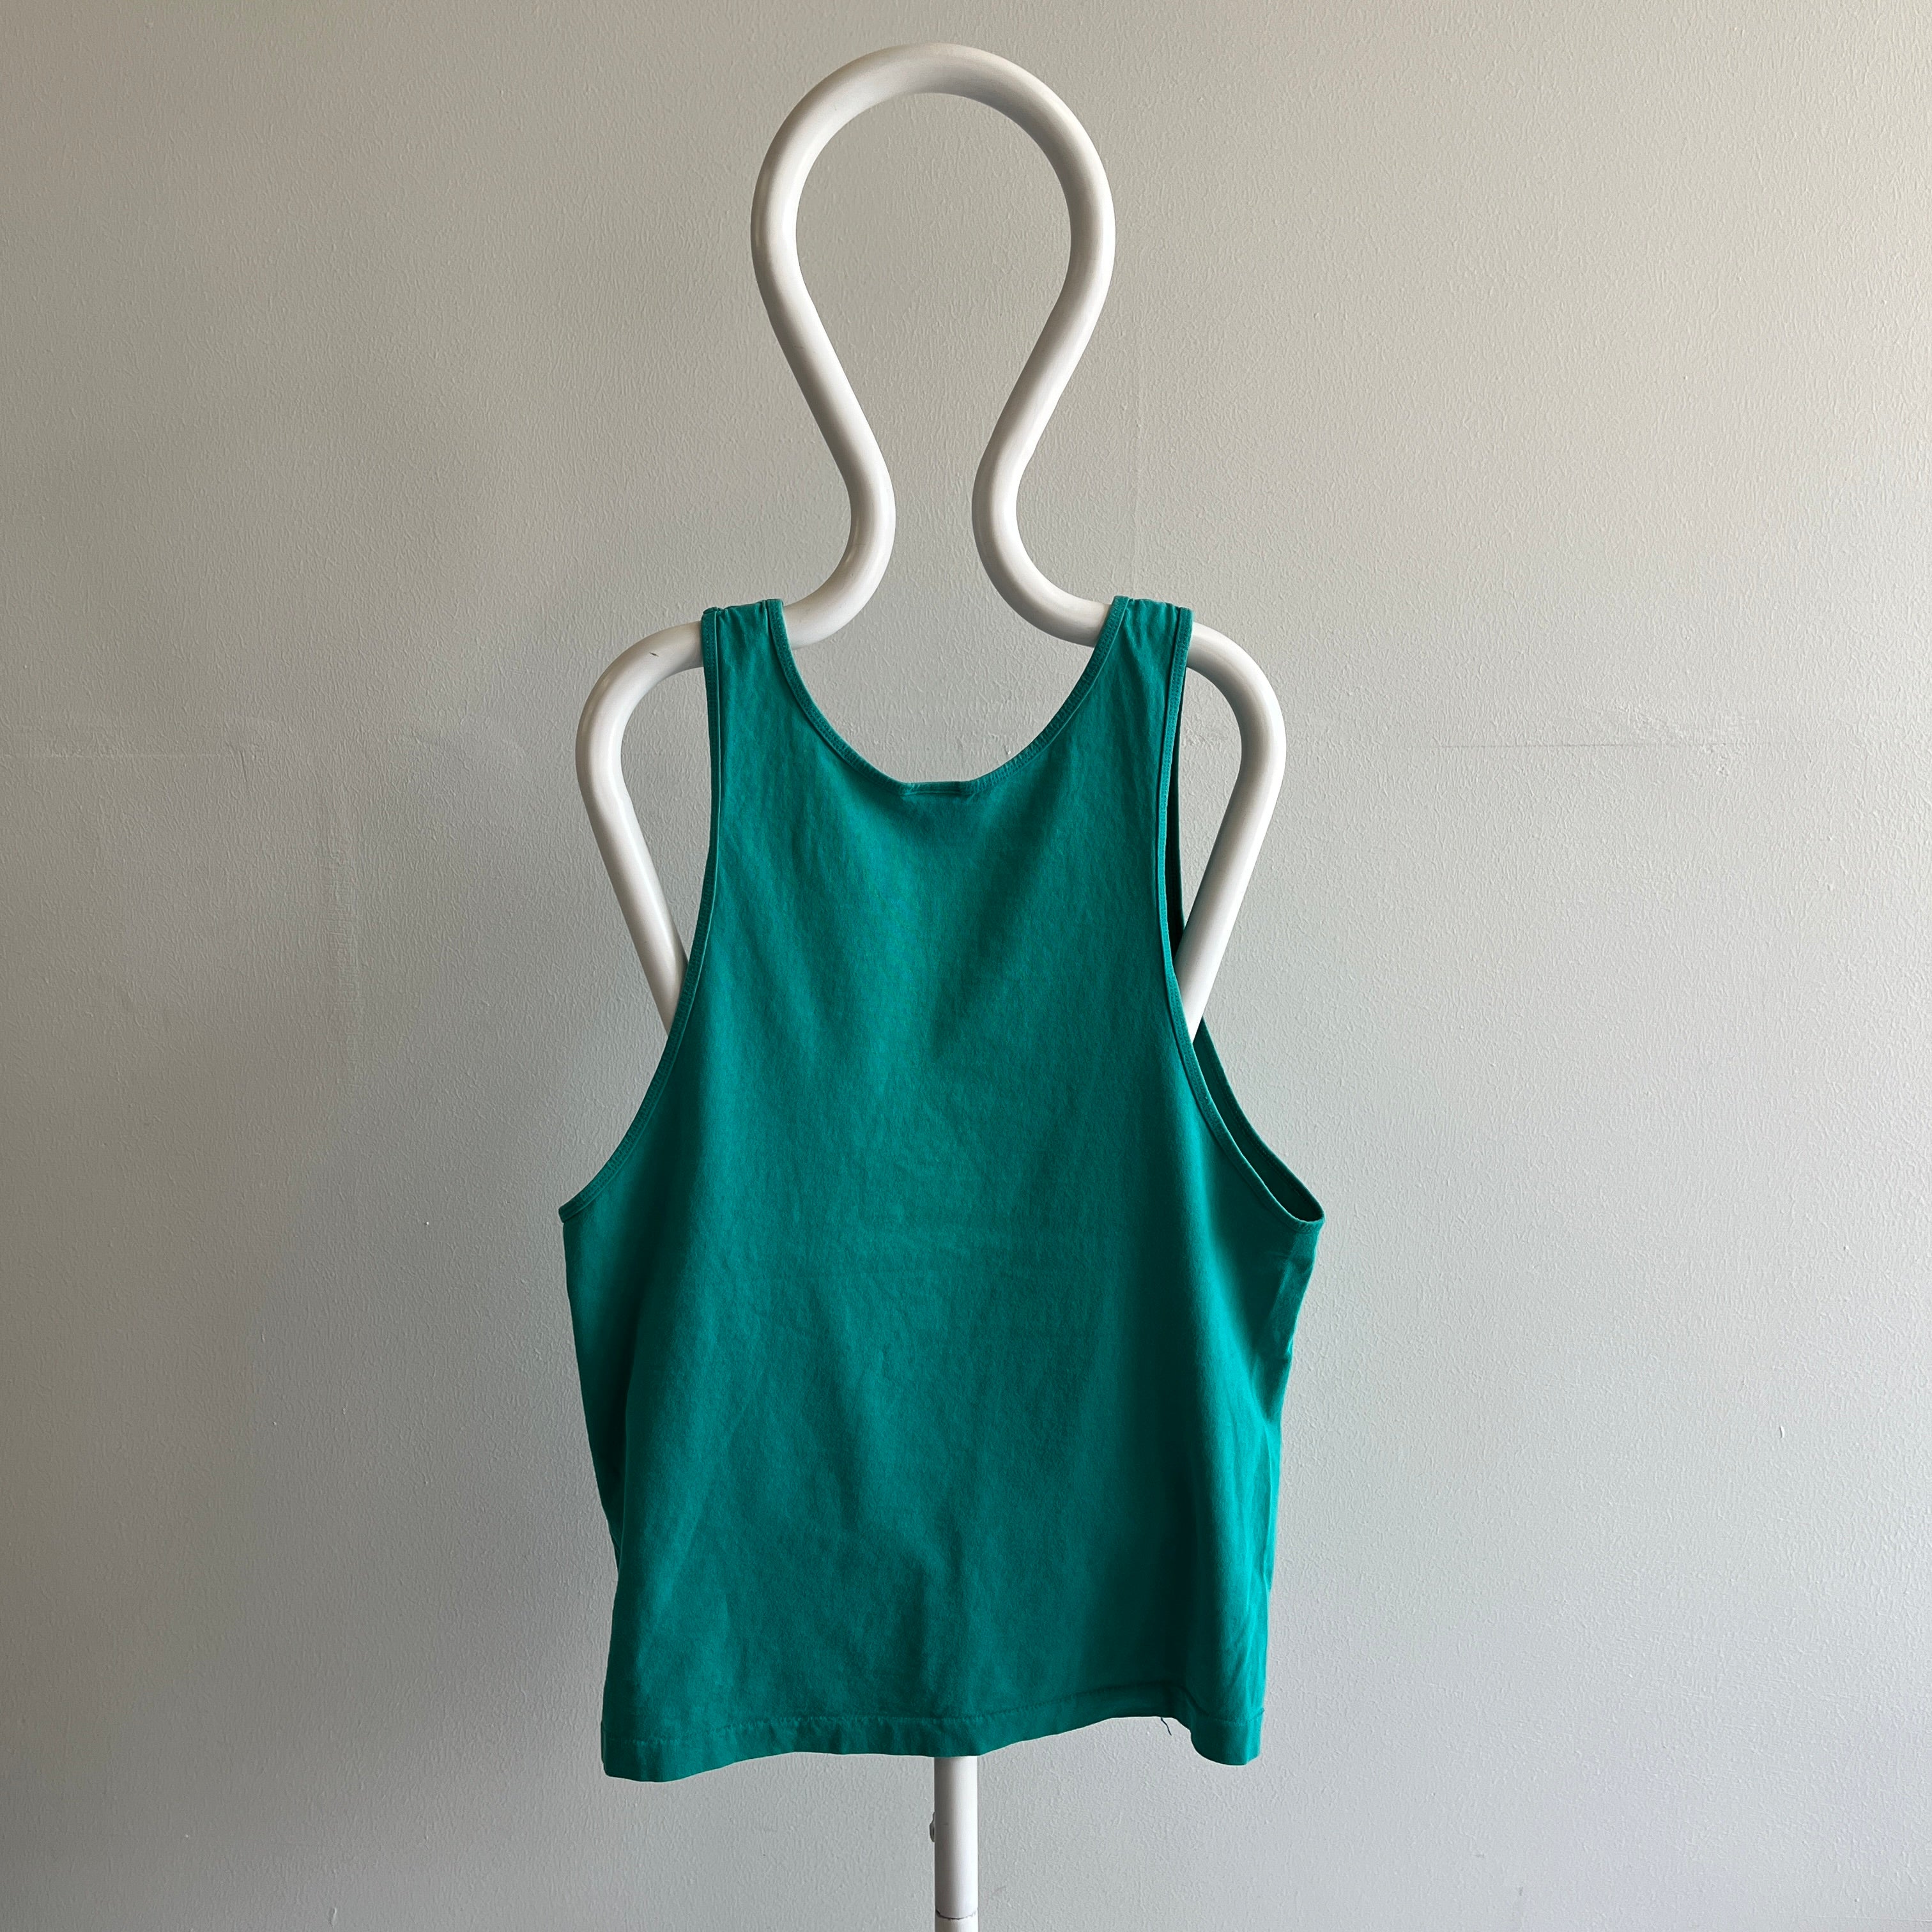 1990s Blank Teal Cotton Tank Top